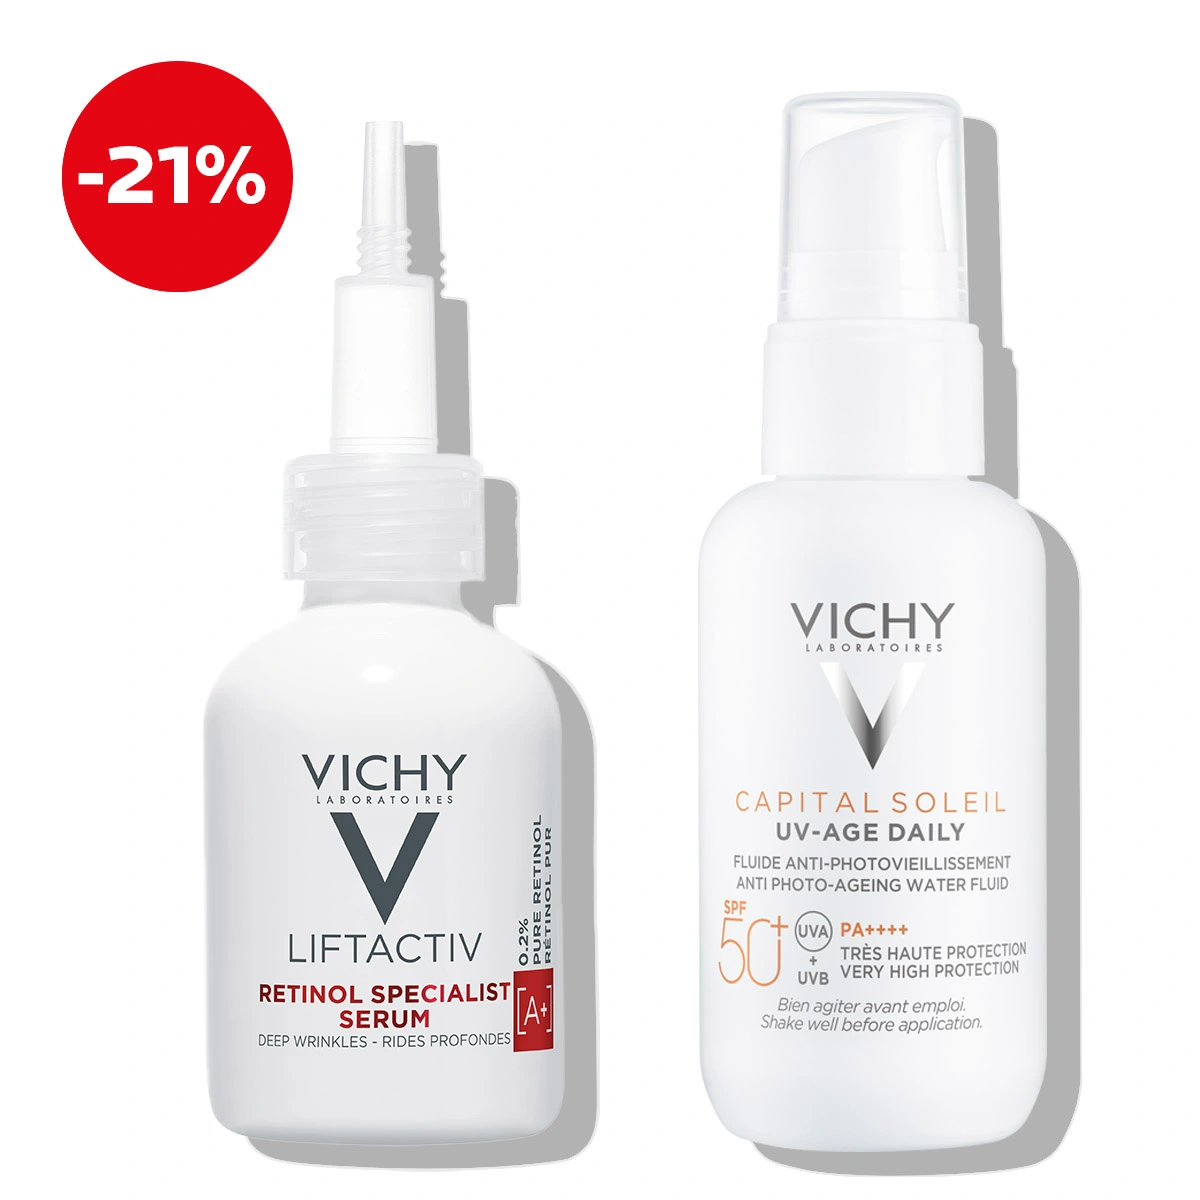 Vichy-Retinol-Protocol-against-pronounced-wrinkles-and-uneven-complexion-_1_